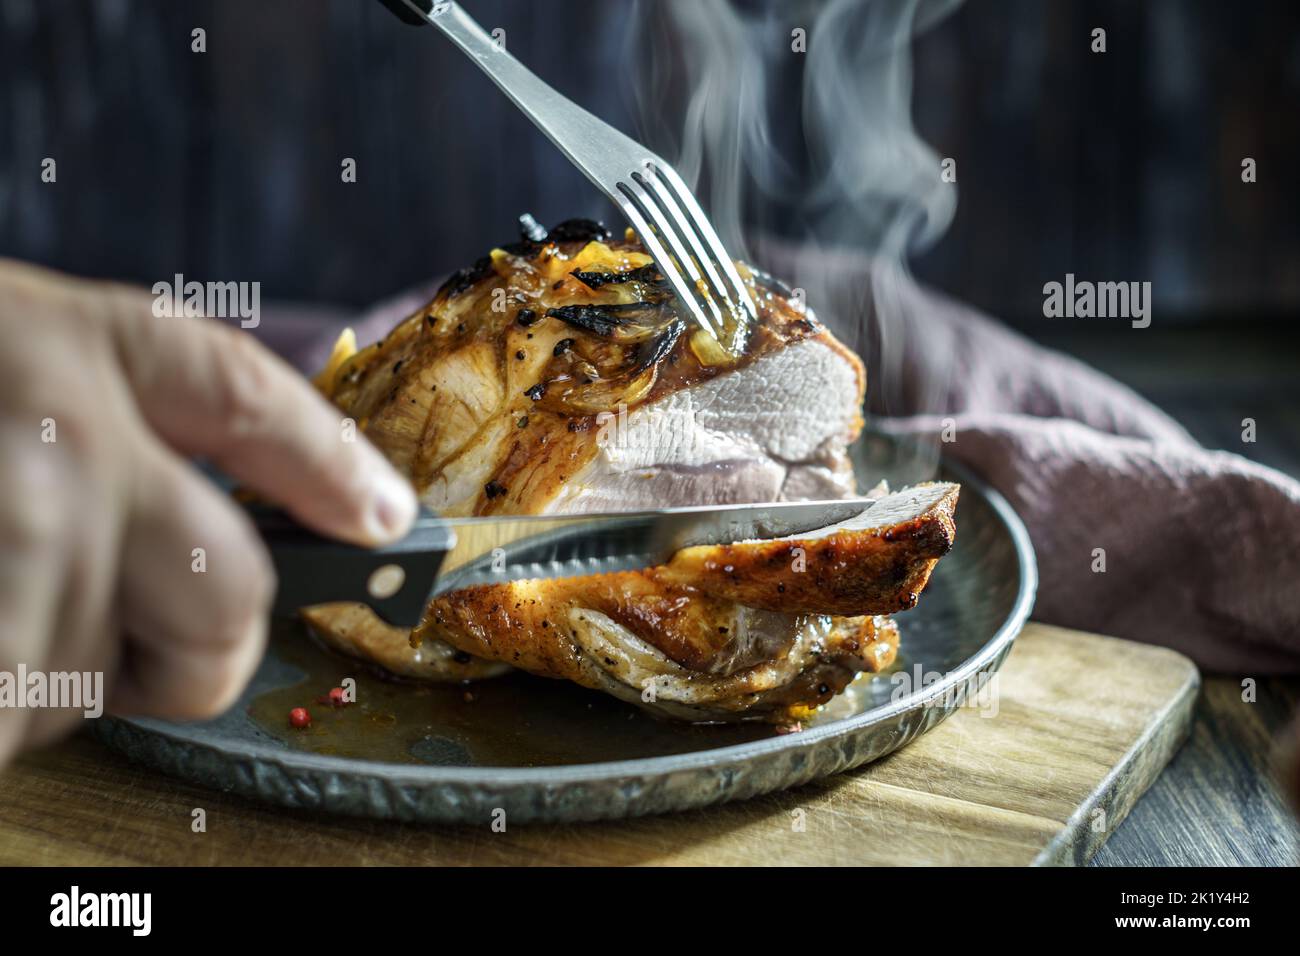 Slicing hot roasted pork with steam closeup. Low shallow focus Stock Photo